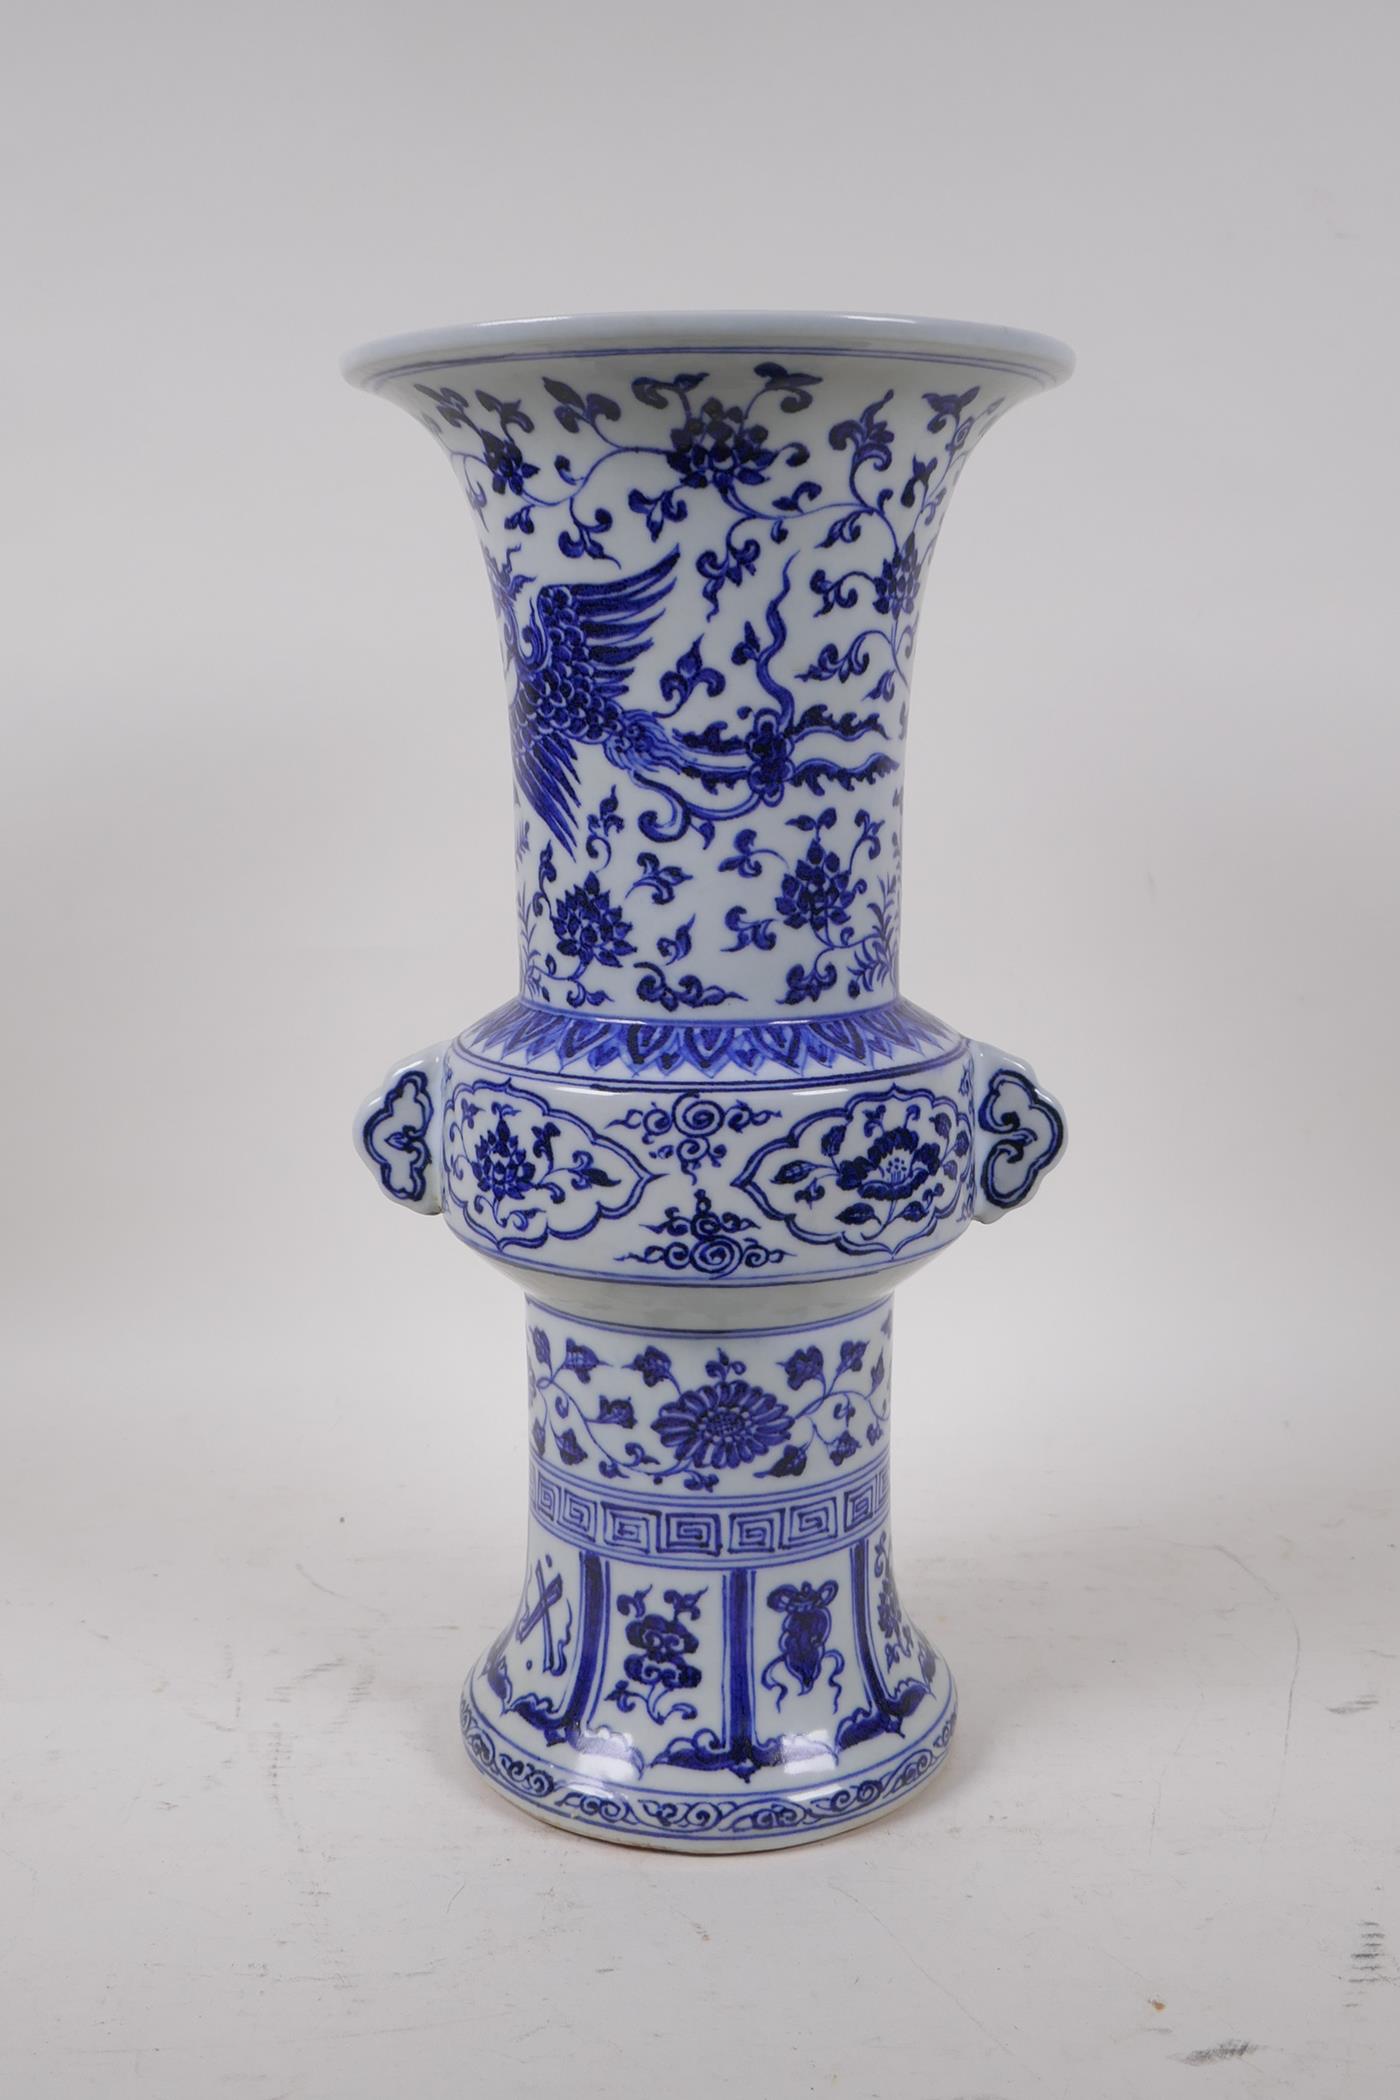 A Chinese Ming style blue and white porcelain gu shaped vase with two handles decorated with a